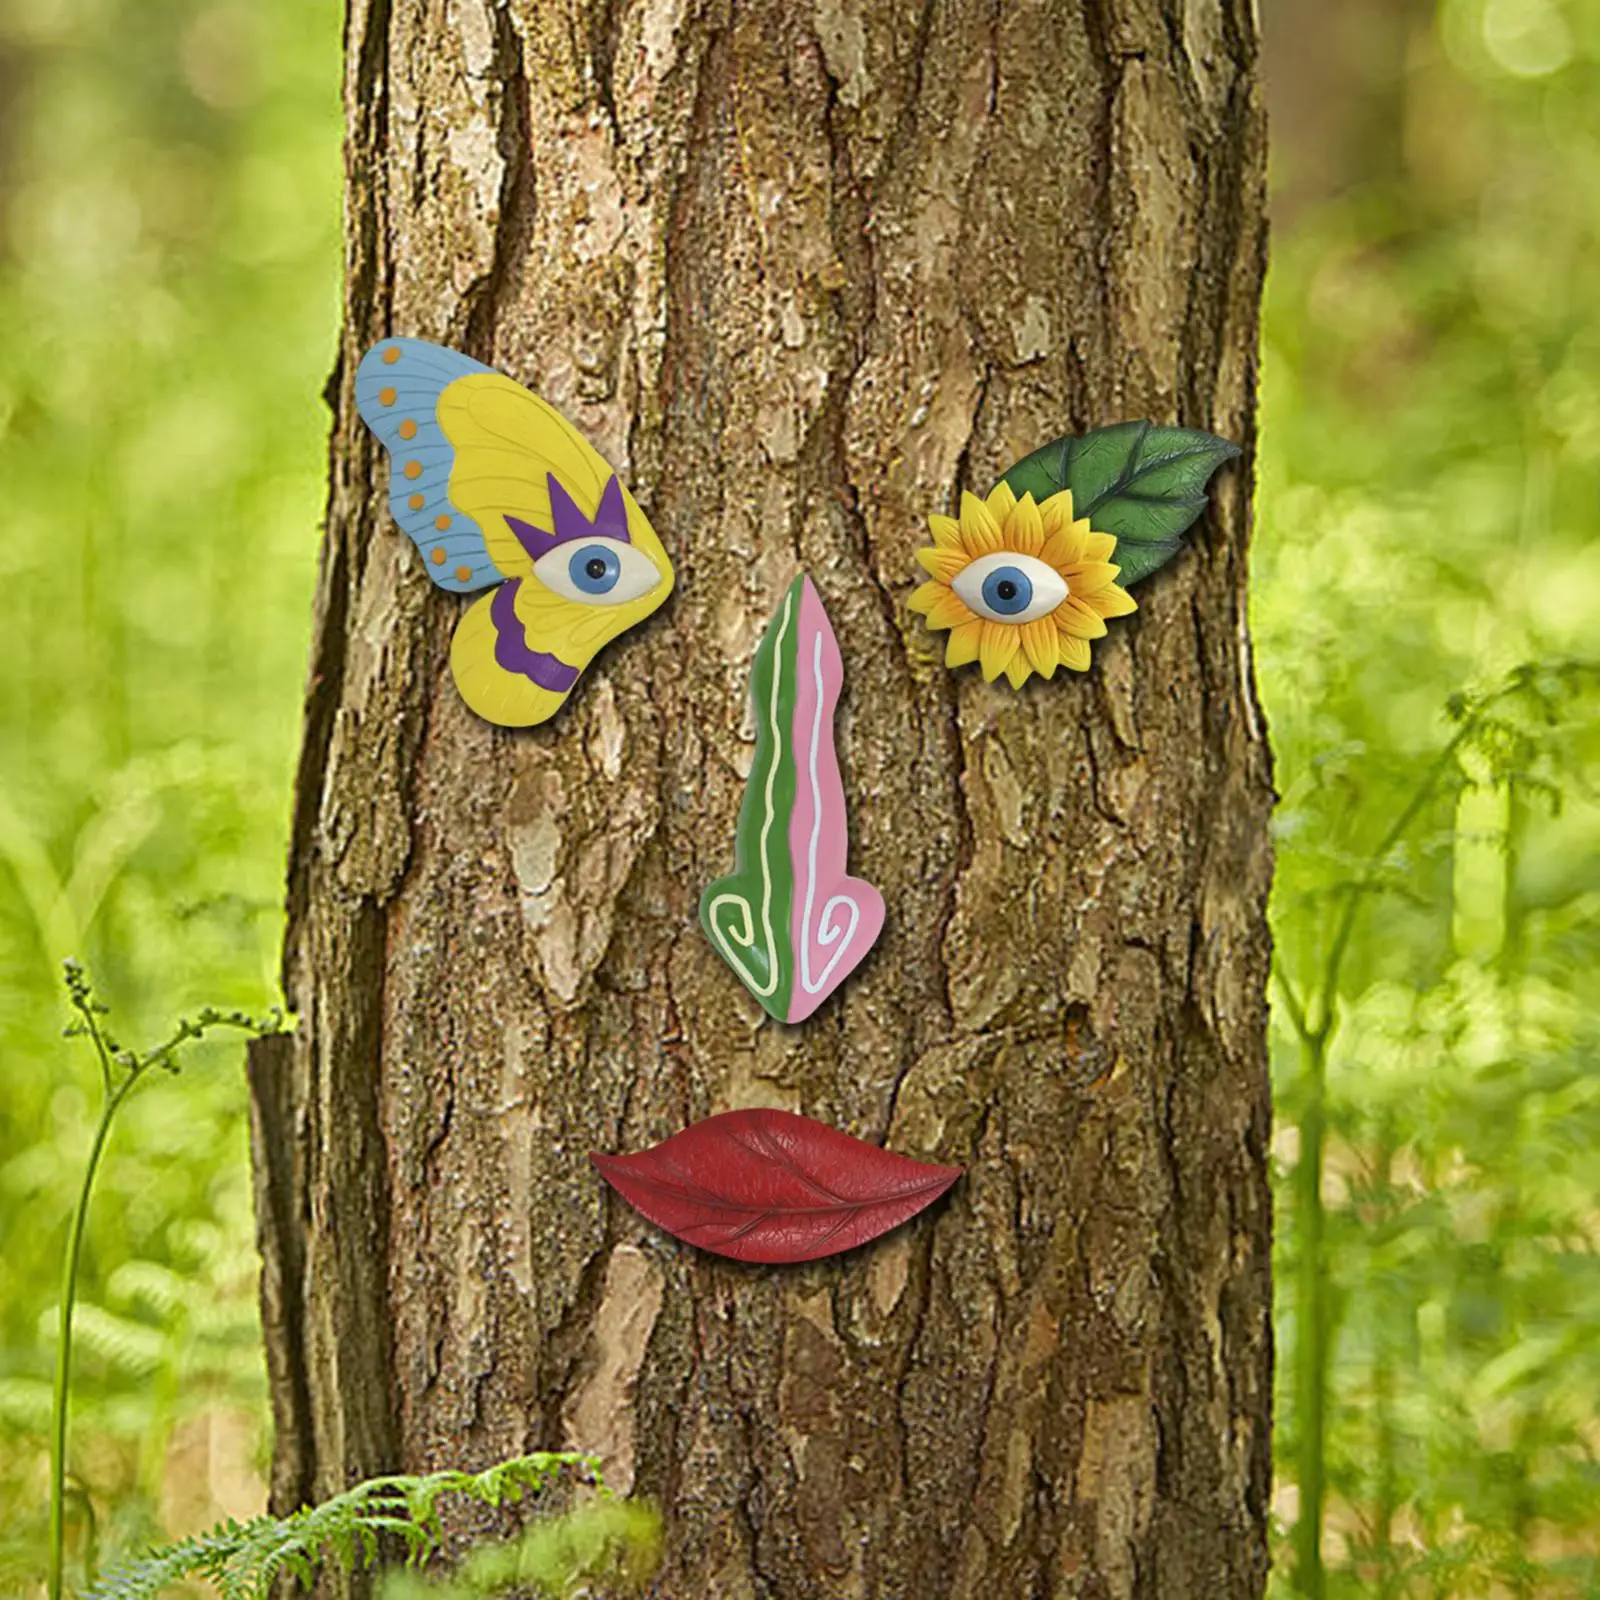 

Colorful Funny Outdoor Tree Faces Decor Durable Eyes Nose Mouth Tree Decorations for Garden Rural Areas Yard Backyard Holidays